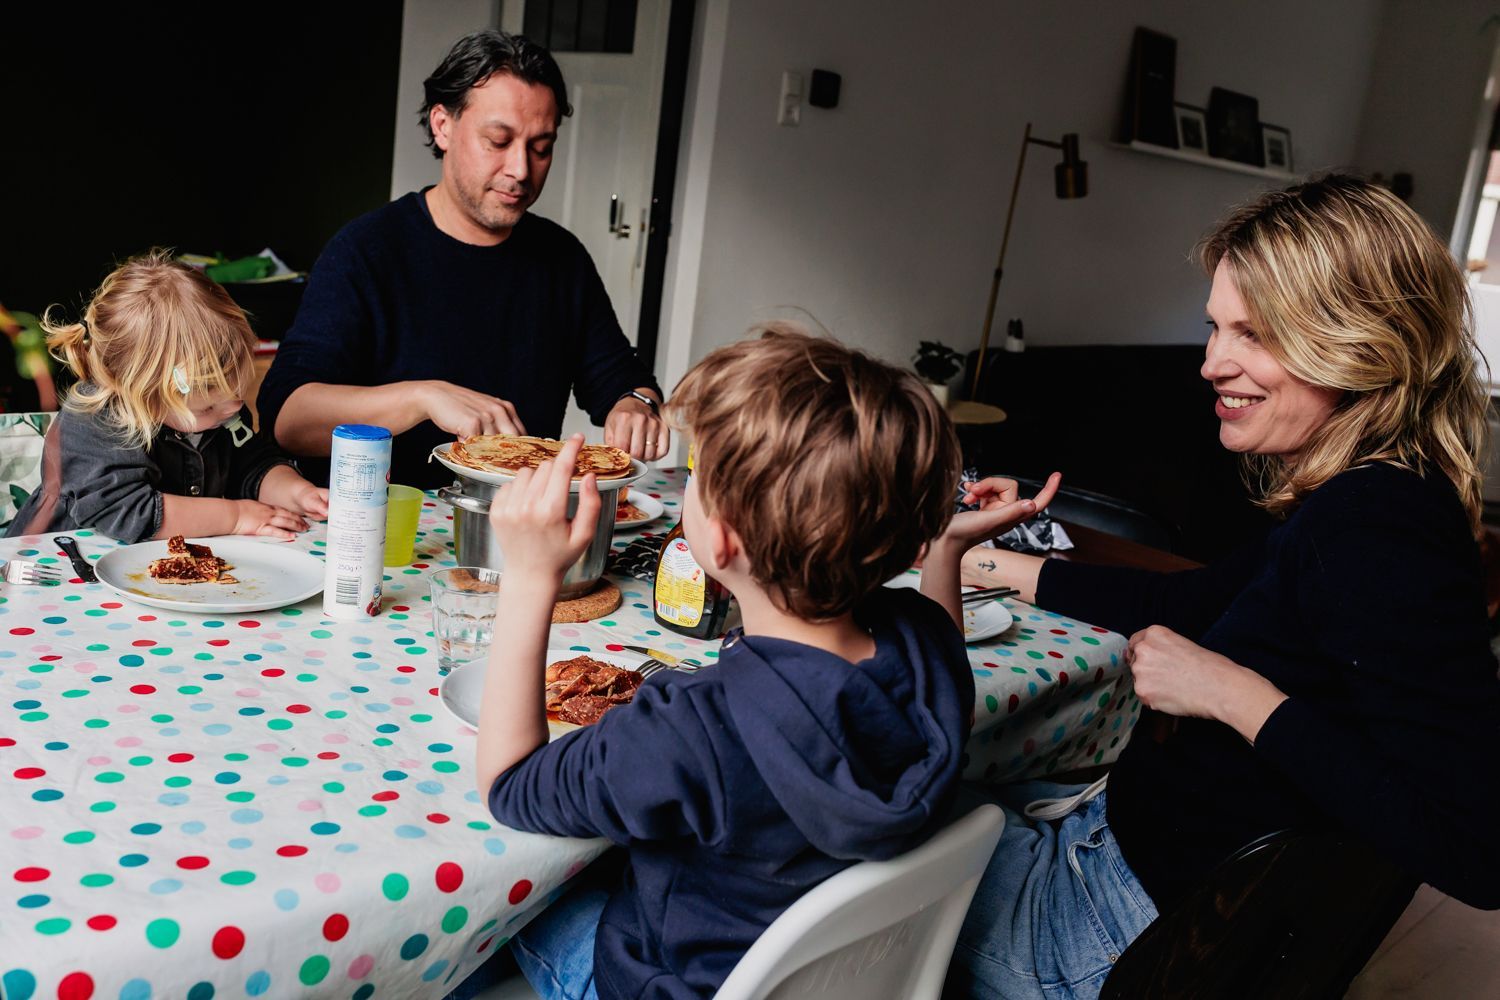 A family is sitting at a table eating food.